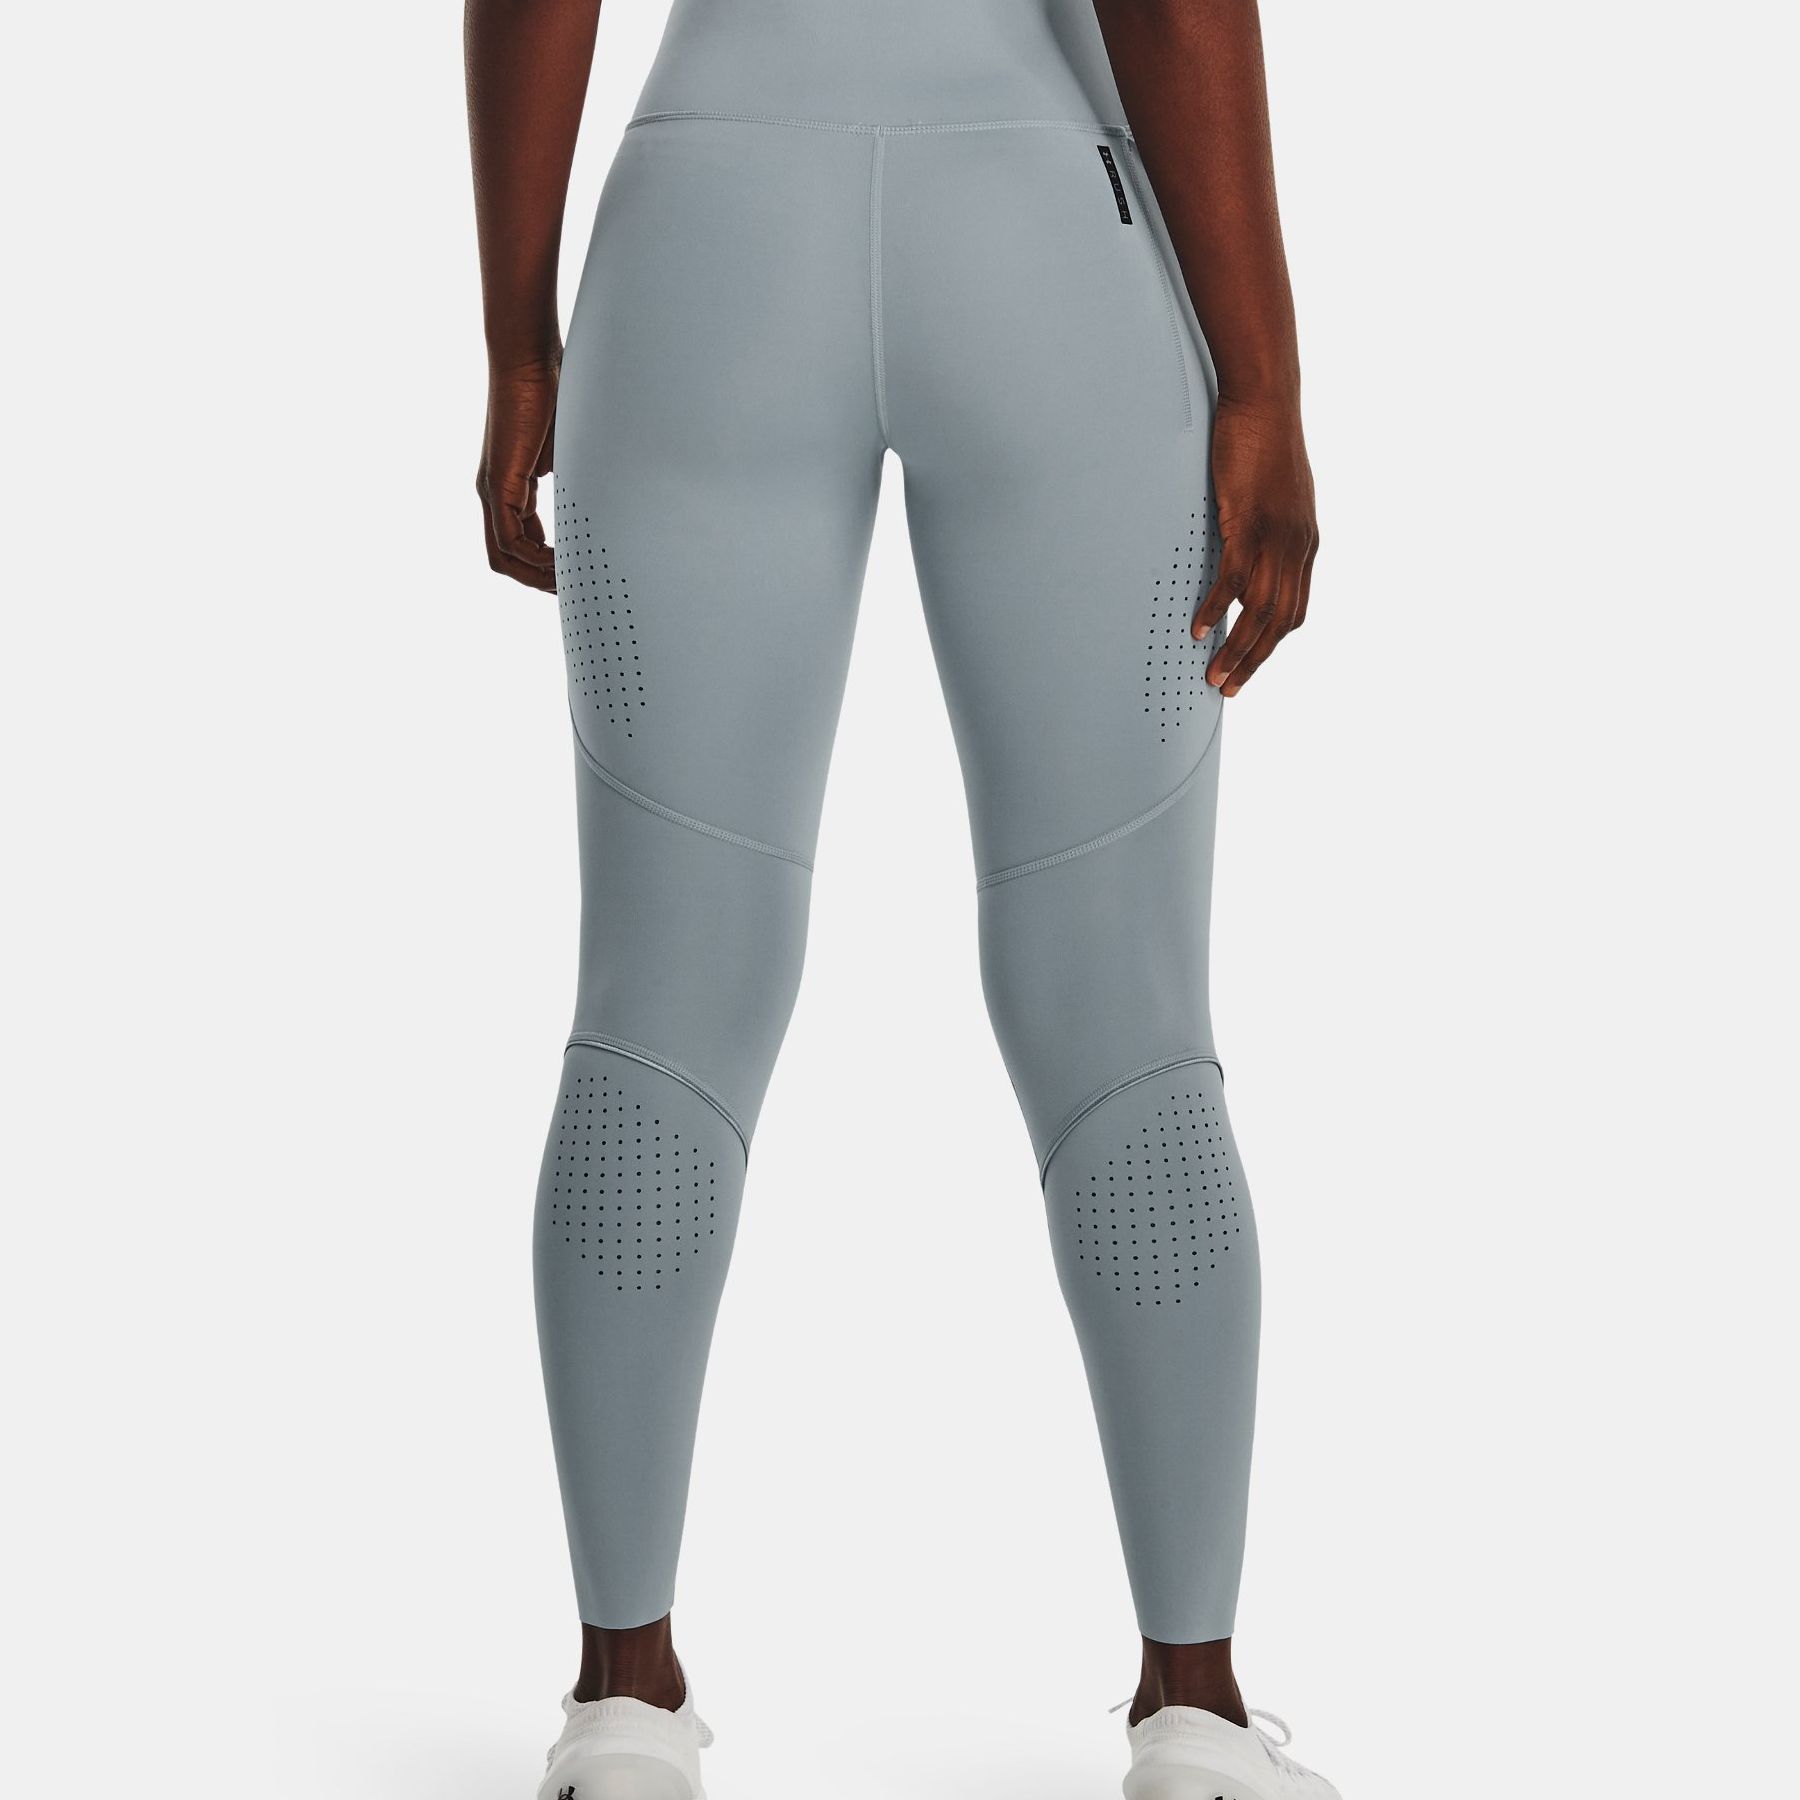 Shorts -  under armour SmartForm Perforated Ankle Leggings